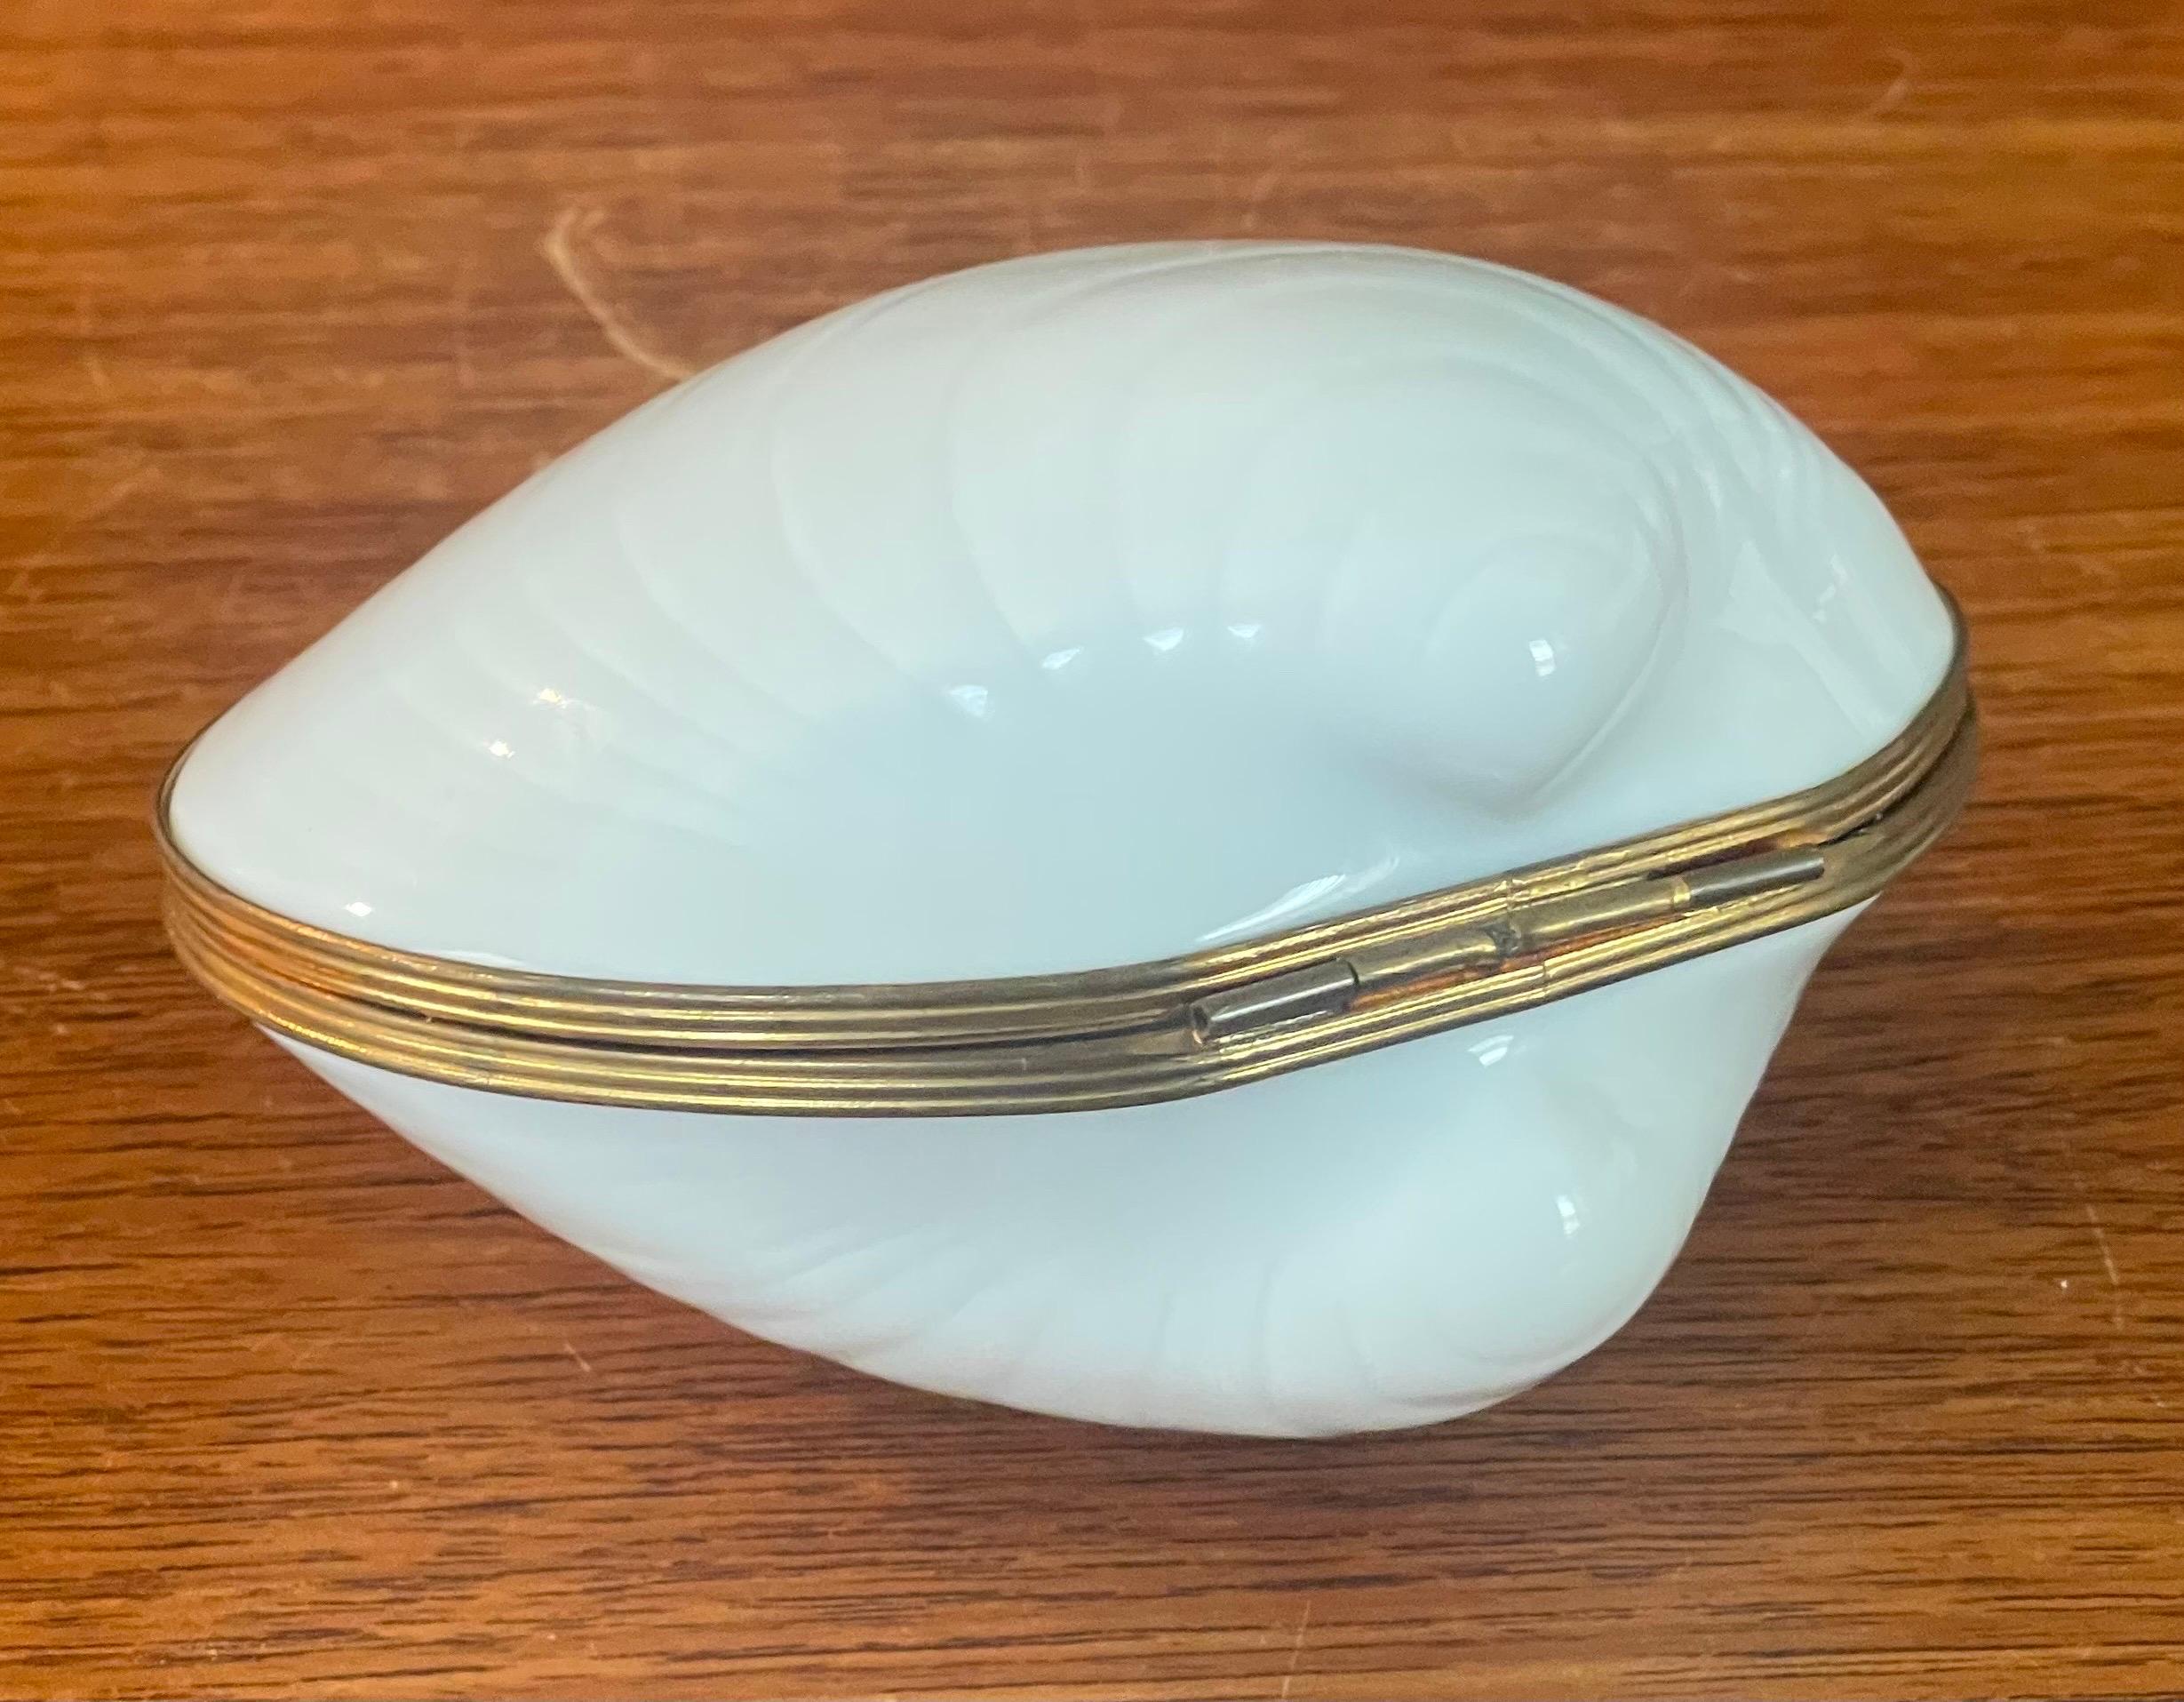 White Porcelain Clam Shell Trinket Box by Limoges In Good Condition For Sale In San Diego, CA